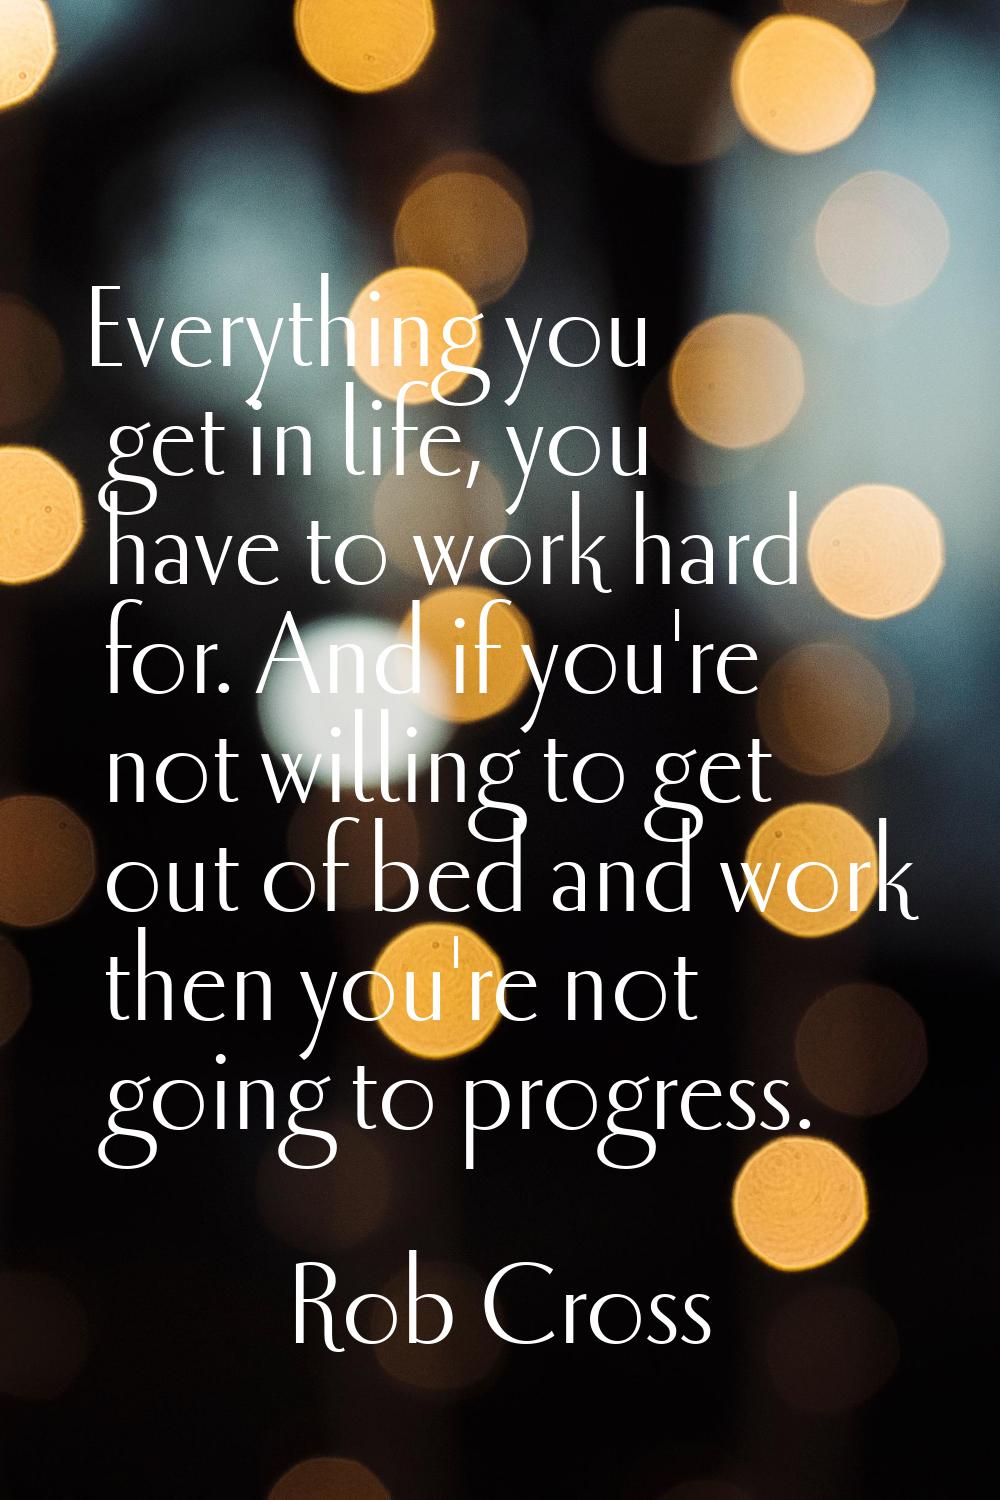 Everything you get in life, you have to work hard for. And if you're not willing to get out of bed 